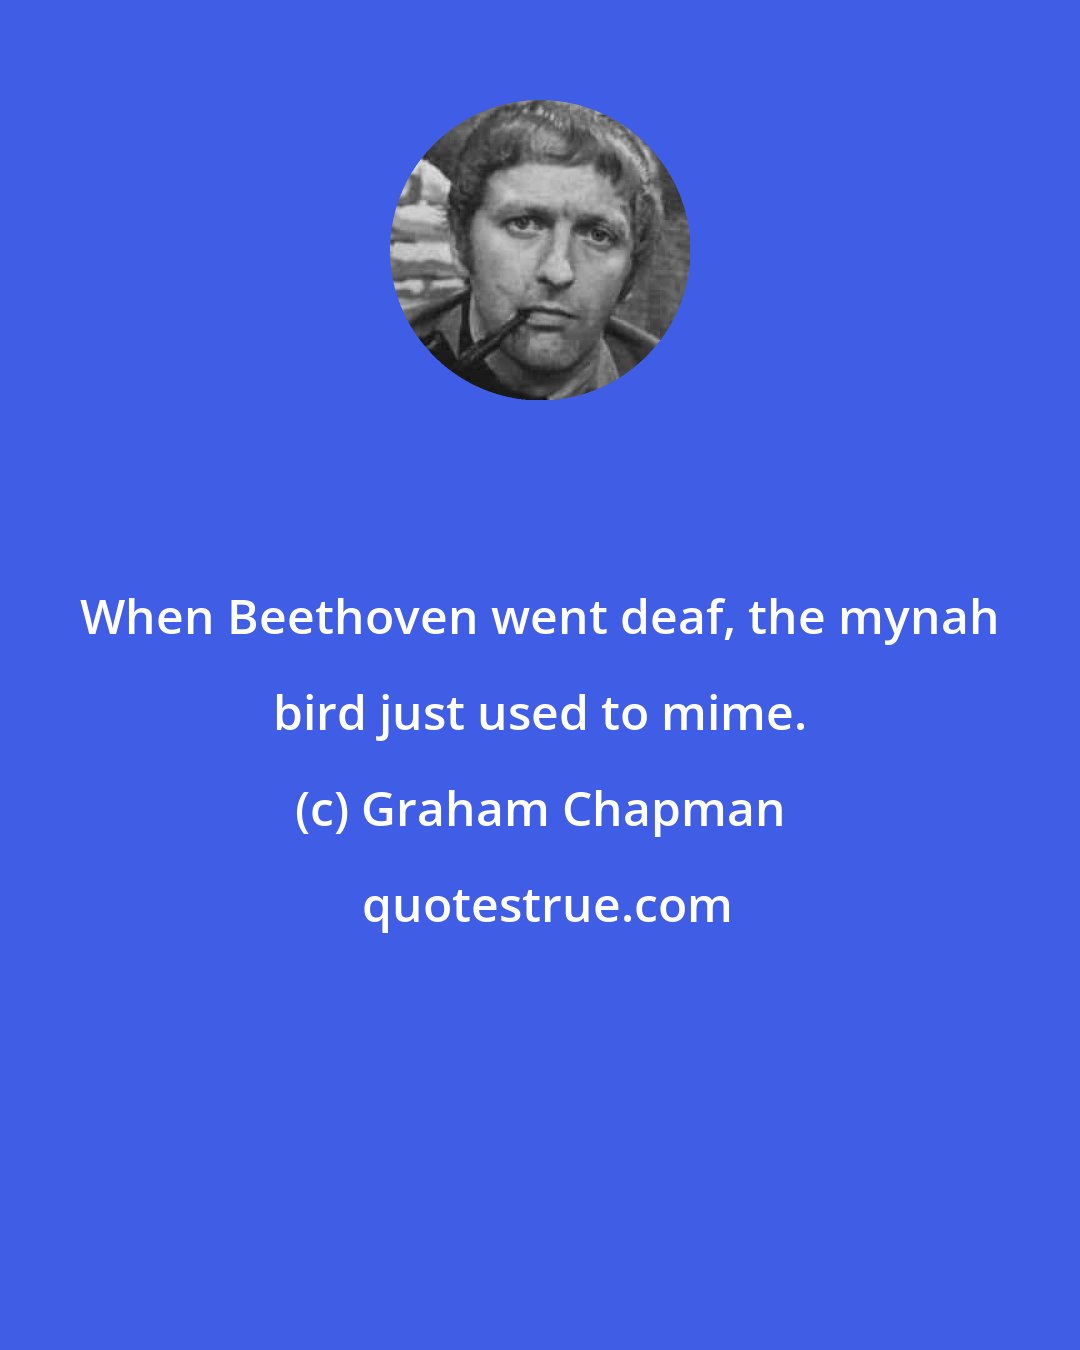 Graham Chapman: When Beethoven went deaf, the mynah bird just used to mime.